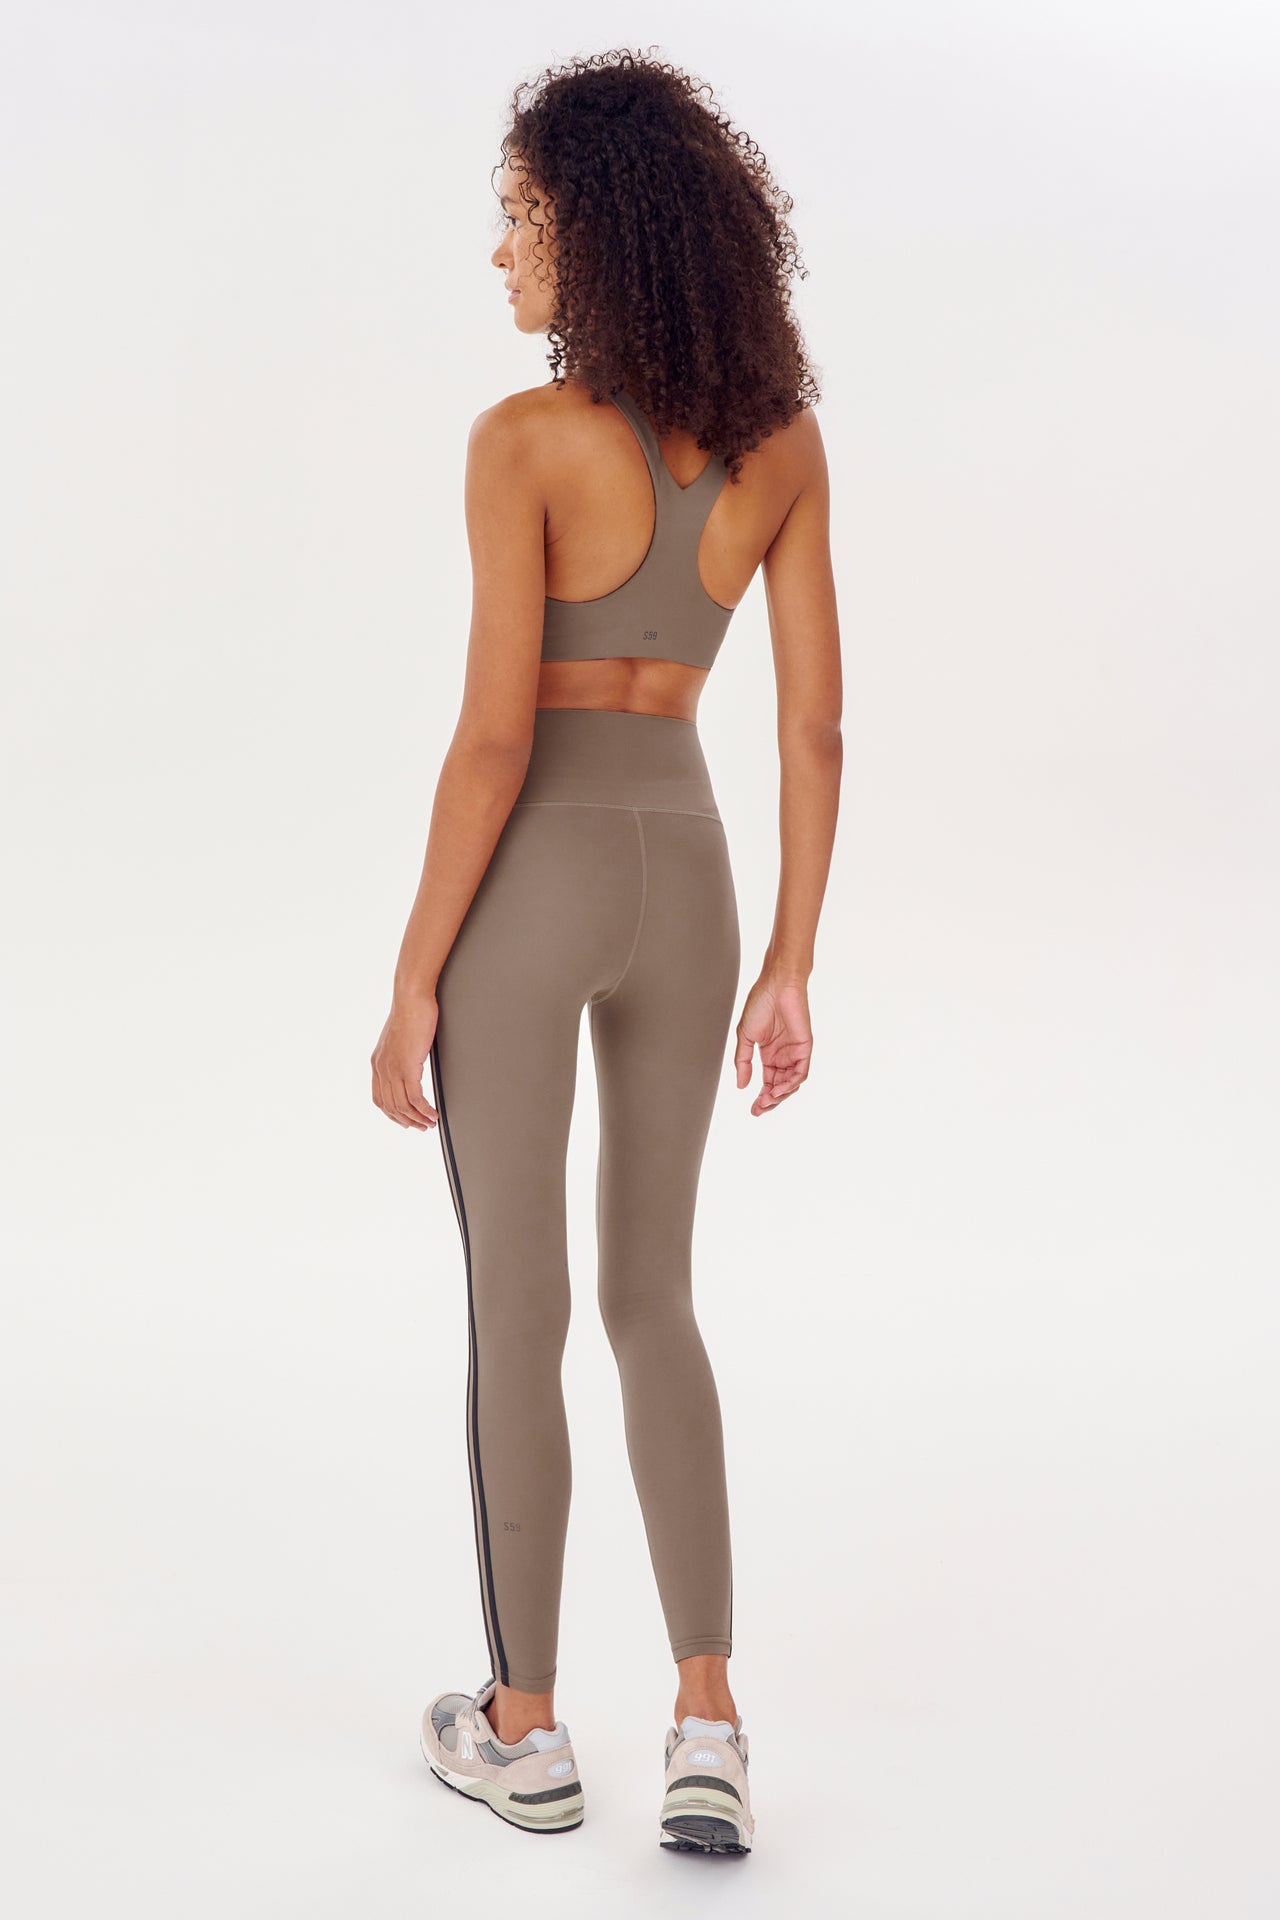 The back view of a woman in a SPLITS59 Ella High Waist Airweight 7/8 - Lentil/Black sports bra and high waist leggings, ideal for hot yoga.